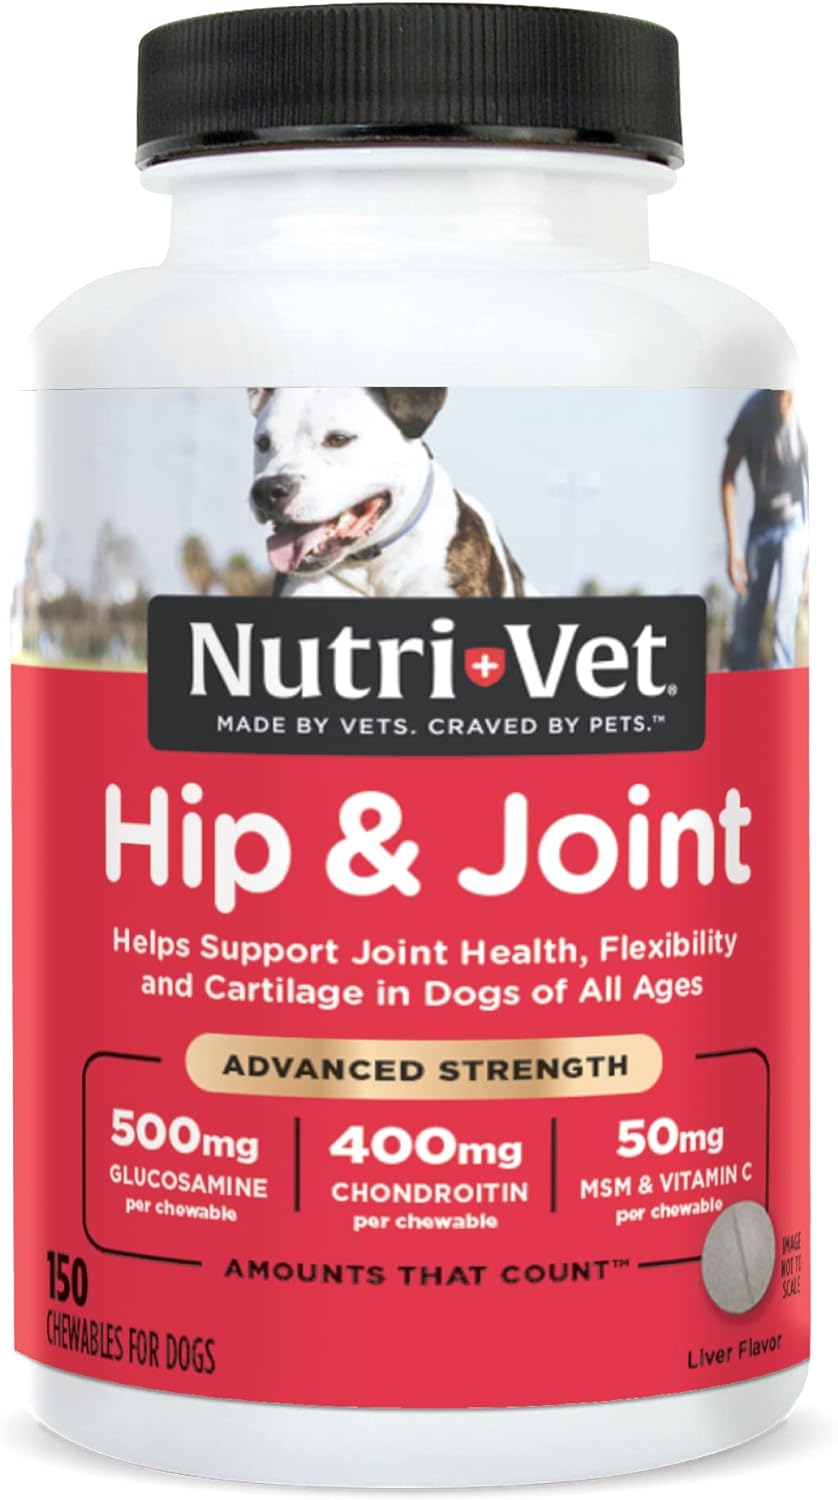 Nutri-Vet Advanced Strength Hip & Joint Chewable Dog Supplements | Formulated with Glucosamine & Chondroitin to Support Dog Cartilage & Mobility | 150 Tablets,RED